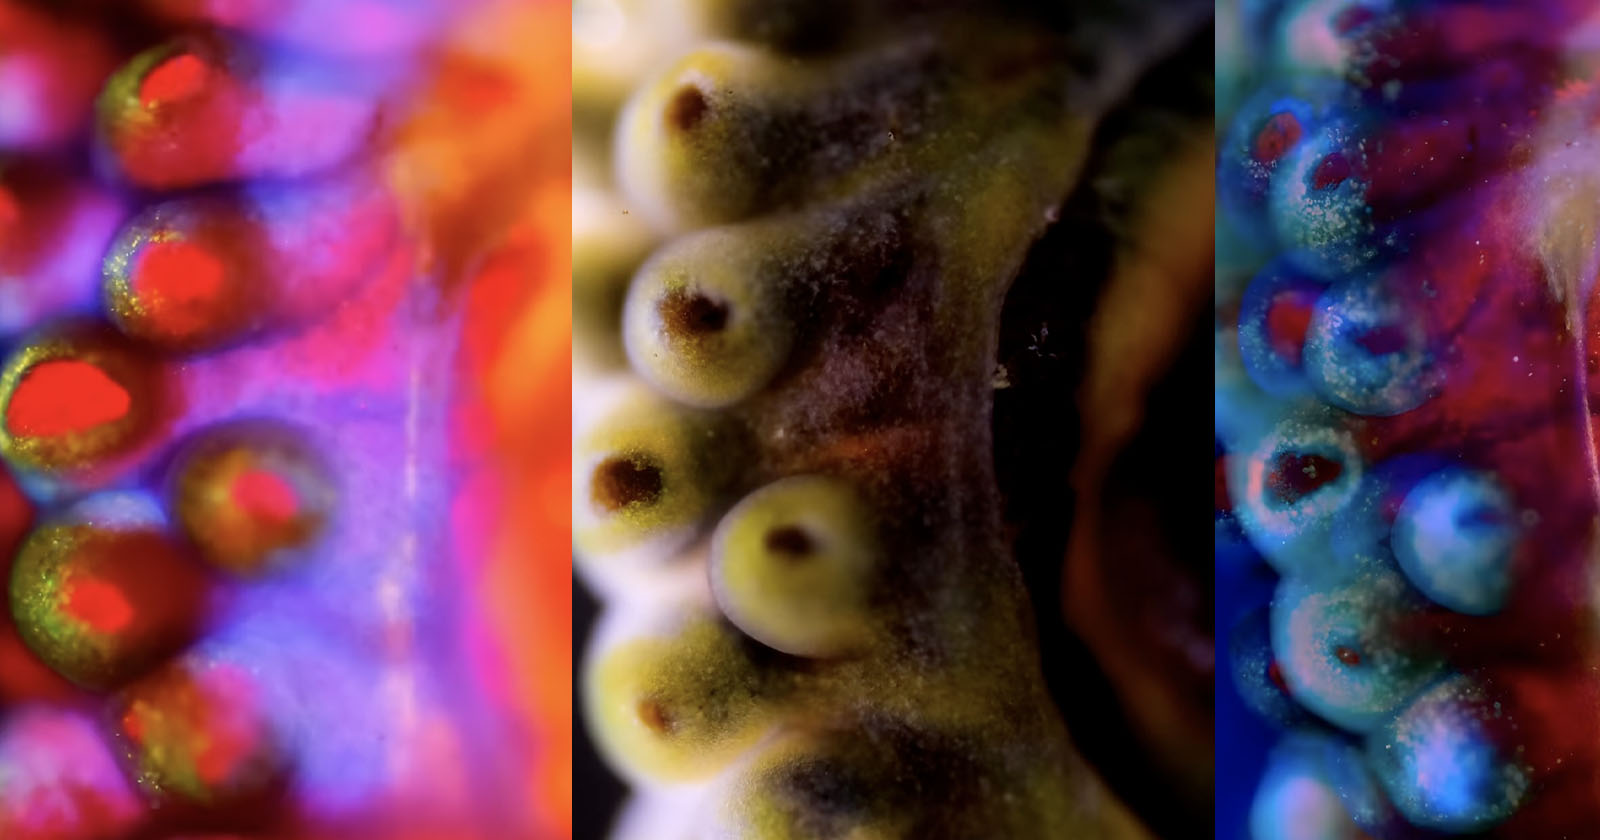 Microscopic Footage of Coral Reveals a Colorful Symbiotic Relationship